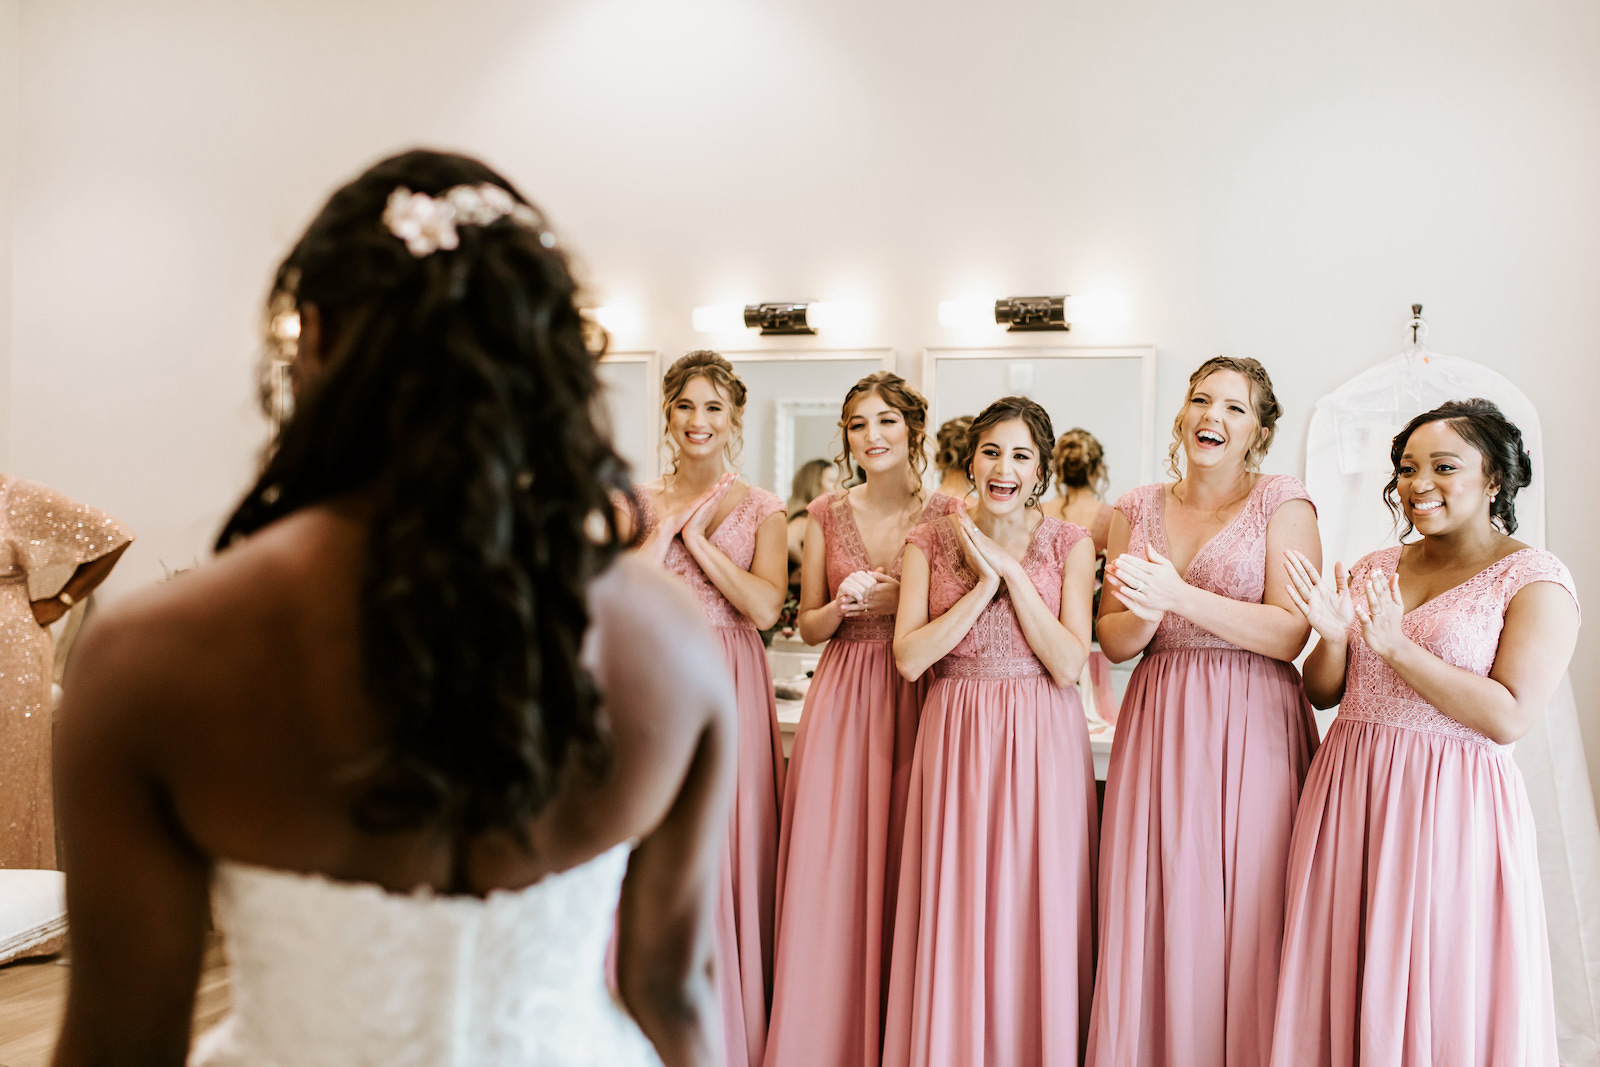 Bride and Bridesmaids First Look | Blush Pink Dusty Rose Mauve Floor Length Lace Chiffon Bridesmaid Dress Gowns by JJ's House